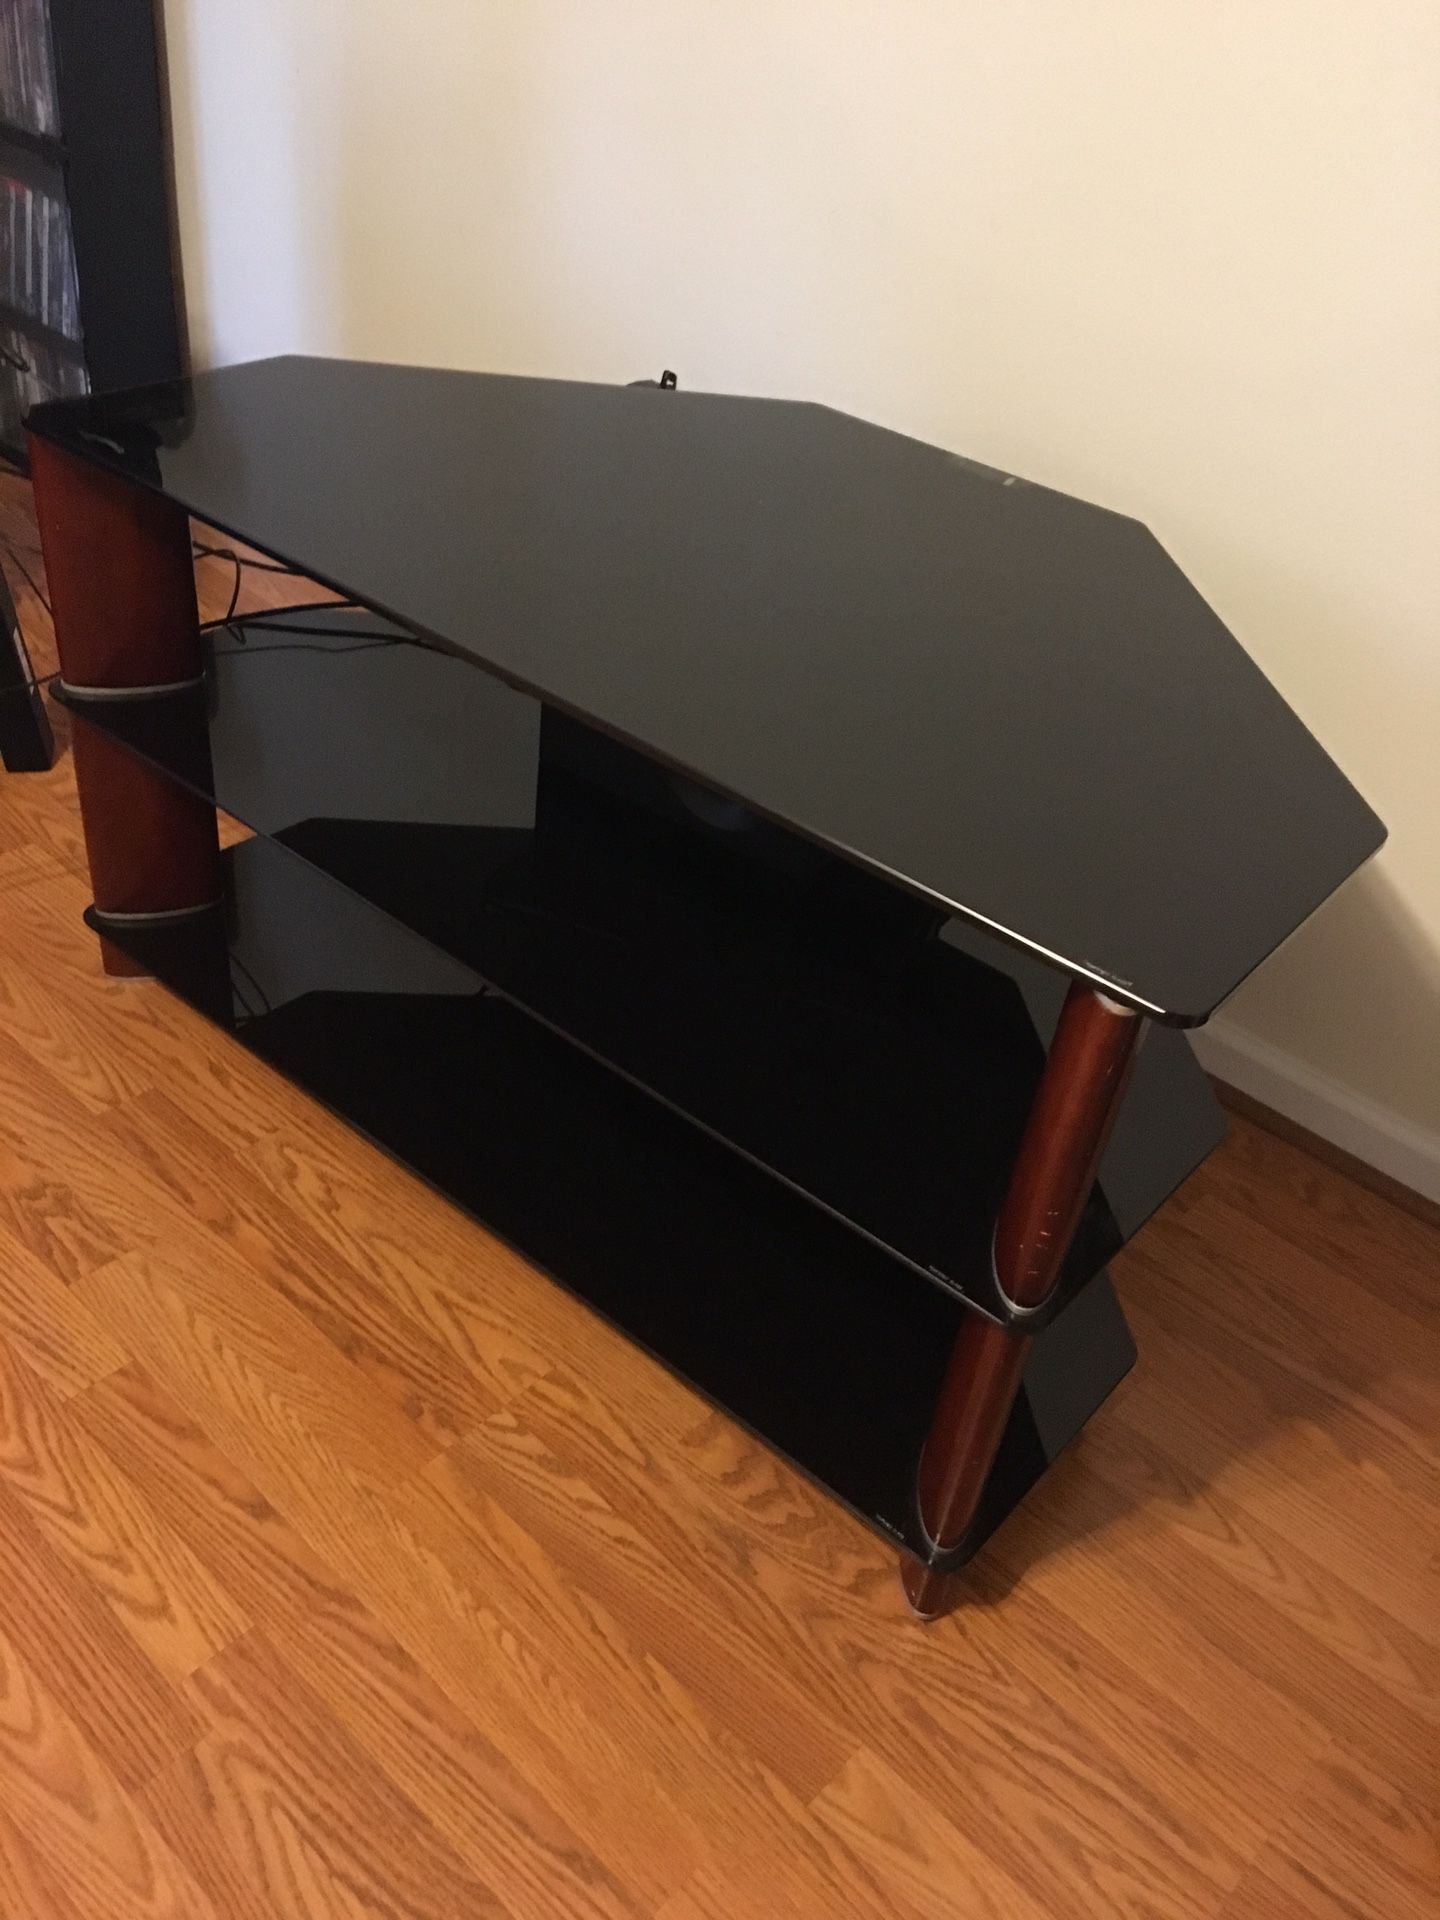 High quality TV STAND